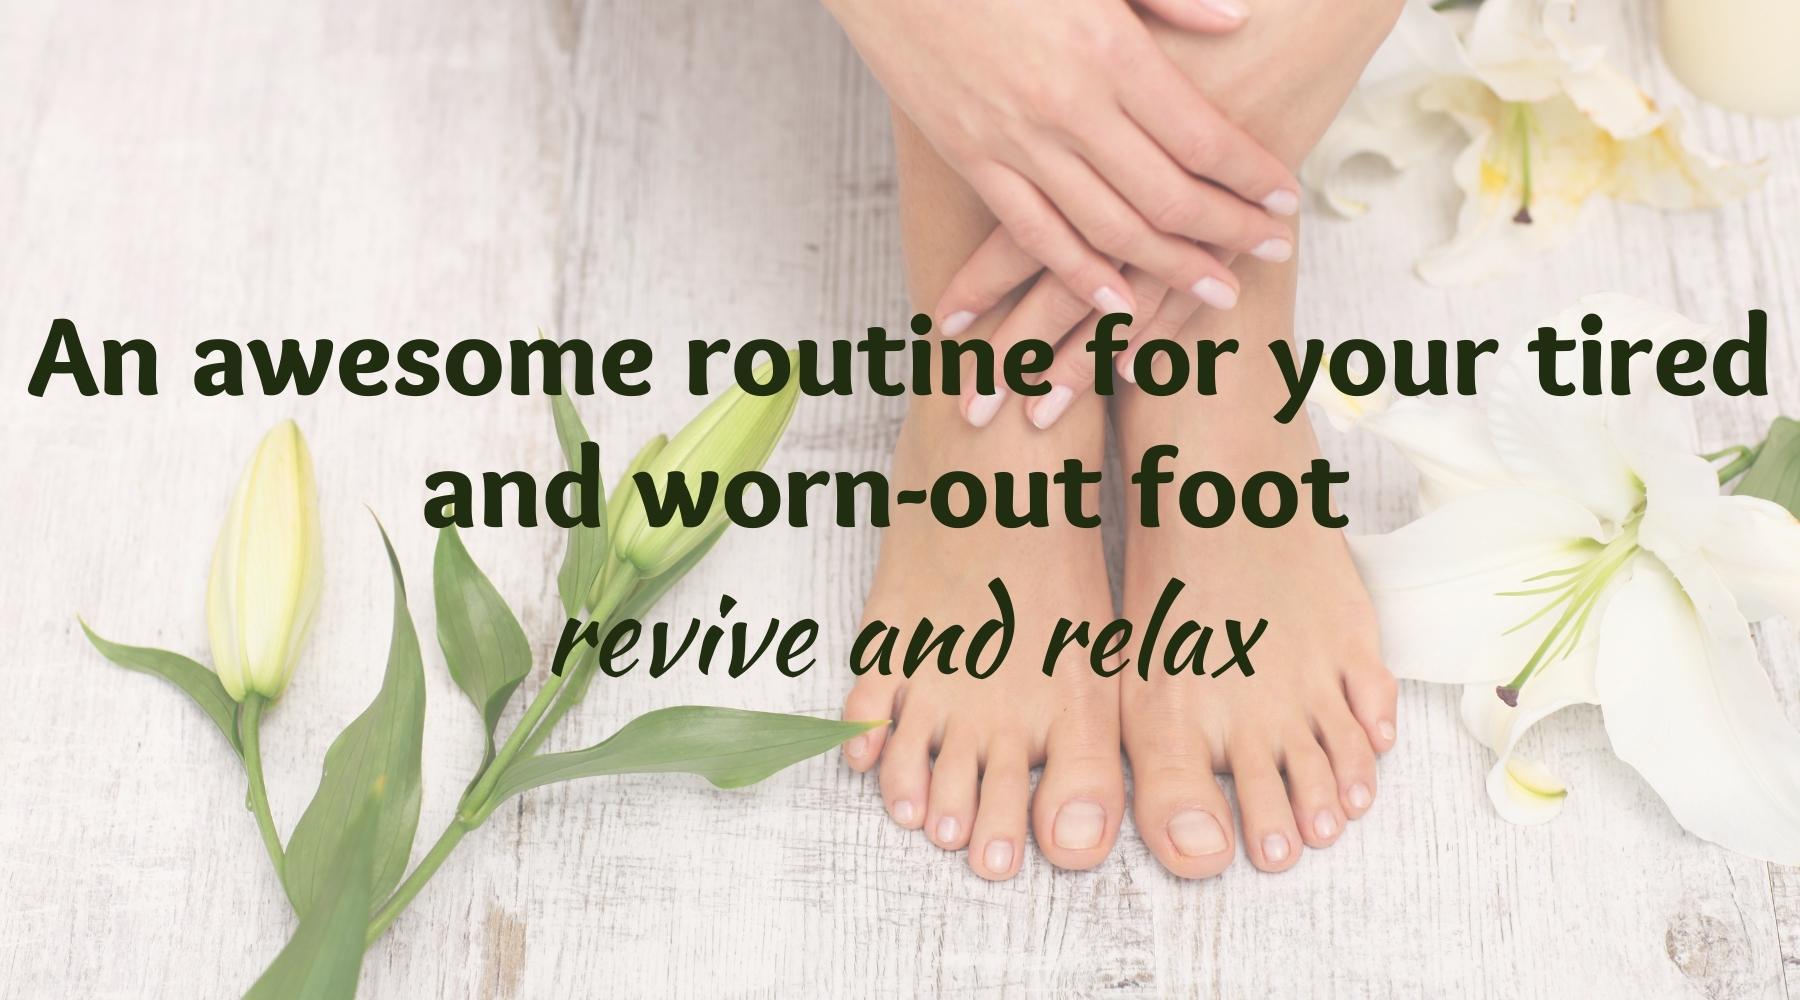 Pad Paricharya - An awesome routine for your tired and worn-out foot – revive and relax